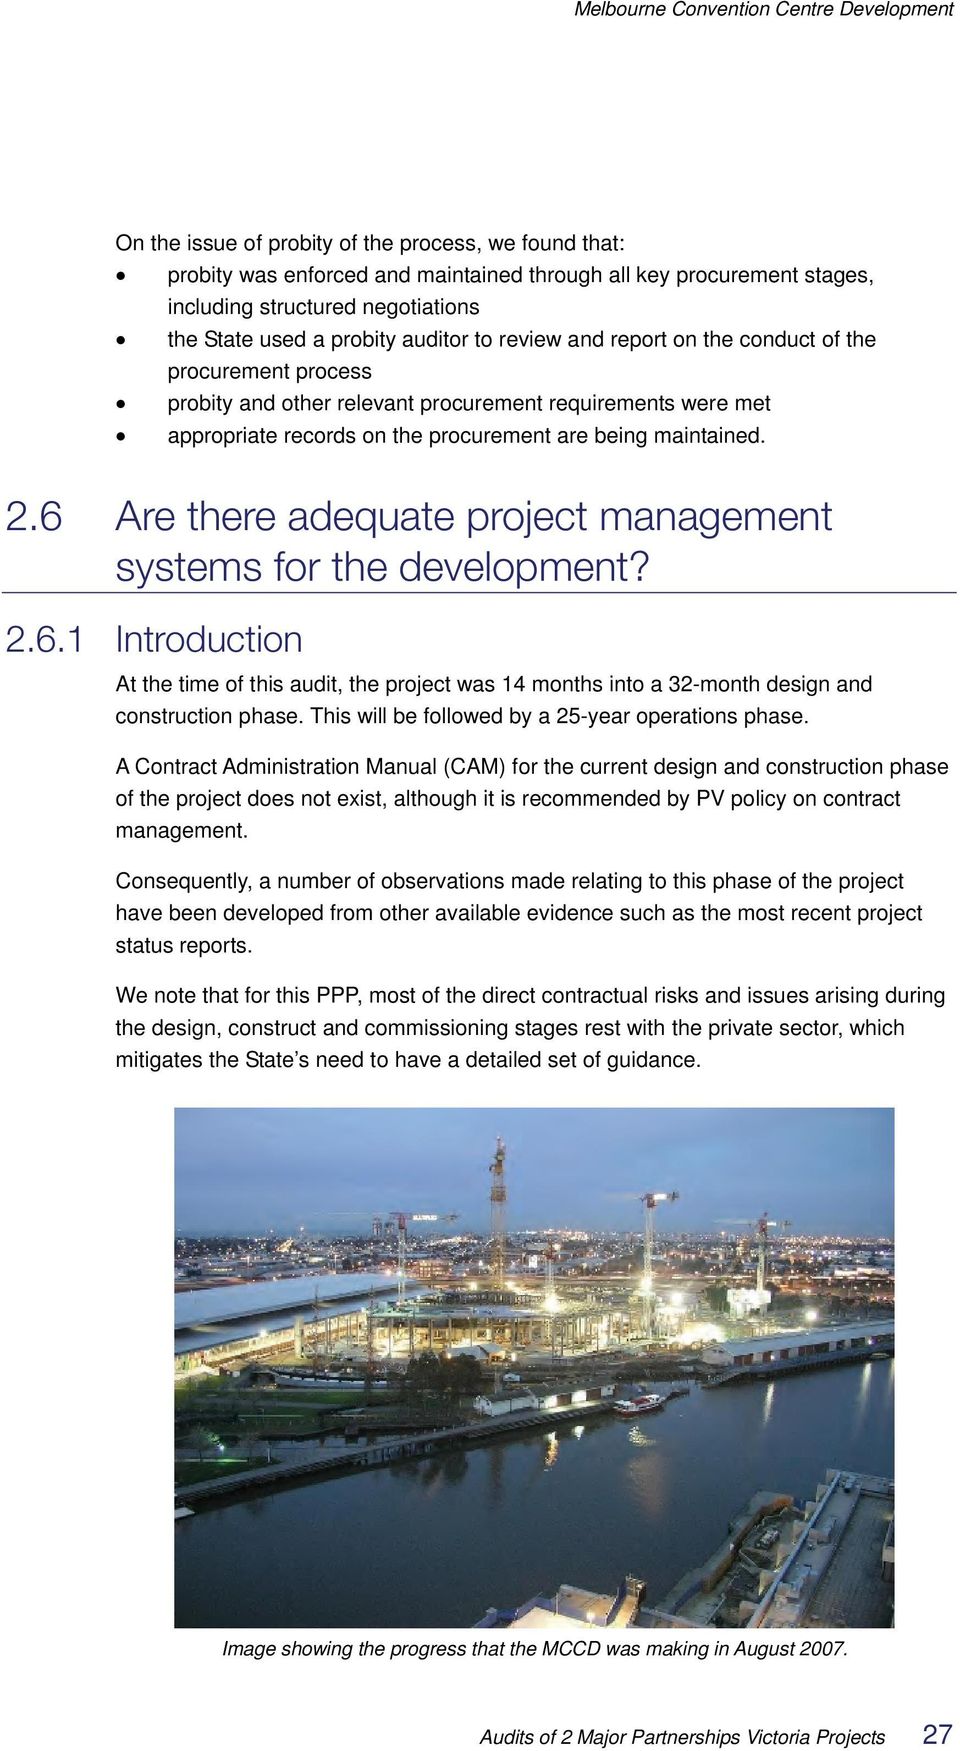 6 Are there adequate project management systems for the development? 2.6.1 Introduction At the time of this audit, the project was 14 months into a 32-month design and construction phase.